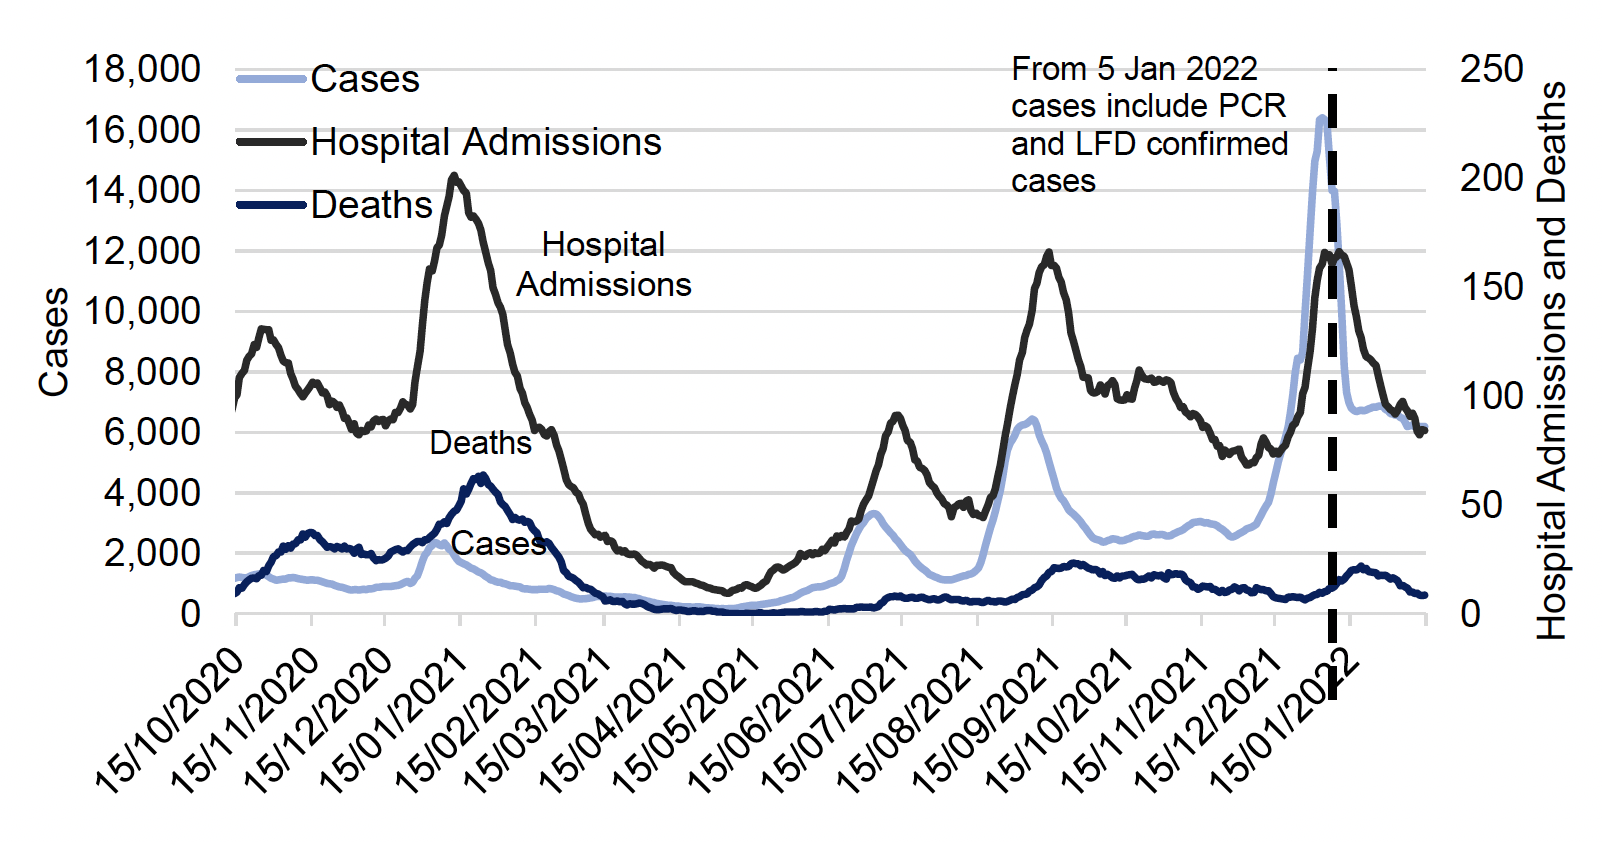 This line chart shows seven-day moving averages of cases by specimen date on the left-hand axis and deaths and hospitalisation on the right-hand axis since October 2020. The number of cases peaked in early January 2021 with just over 2,300 cases, July 2021 with just over 3,300 cases and September 2021 with just over 6,400. The most recent peak in early January 2022 reached approximately 16,400 average cases per day, followed by a sharp decrease. Since late January 2022, cases show a slow downward trend.
Hospital admissions have been following a similar trend; the highest peak was reached in January 2021 with an average of 201 hospital admissions per day. The number of hospital admissions then decreased and peaked again in July 2021 with 91 hospital admissions, September 2021 with an average of 166 hospital admissions recorded per day and January 2022 with an average of 166 admissions per day. Hospital admissions have decreased since. The highest 7-day average of daily deaths was recorded in late January 2021 with 64 deaths. The number of deaths then decreased but increased again slightly in July 2021 and September 2021, and peaked in January 2022 with an average 22 deaths per day.
